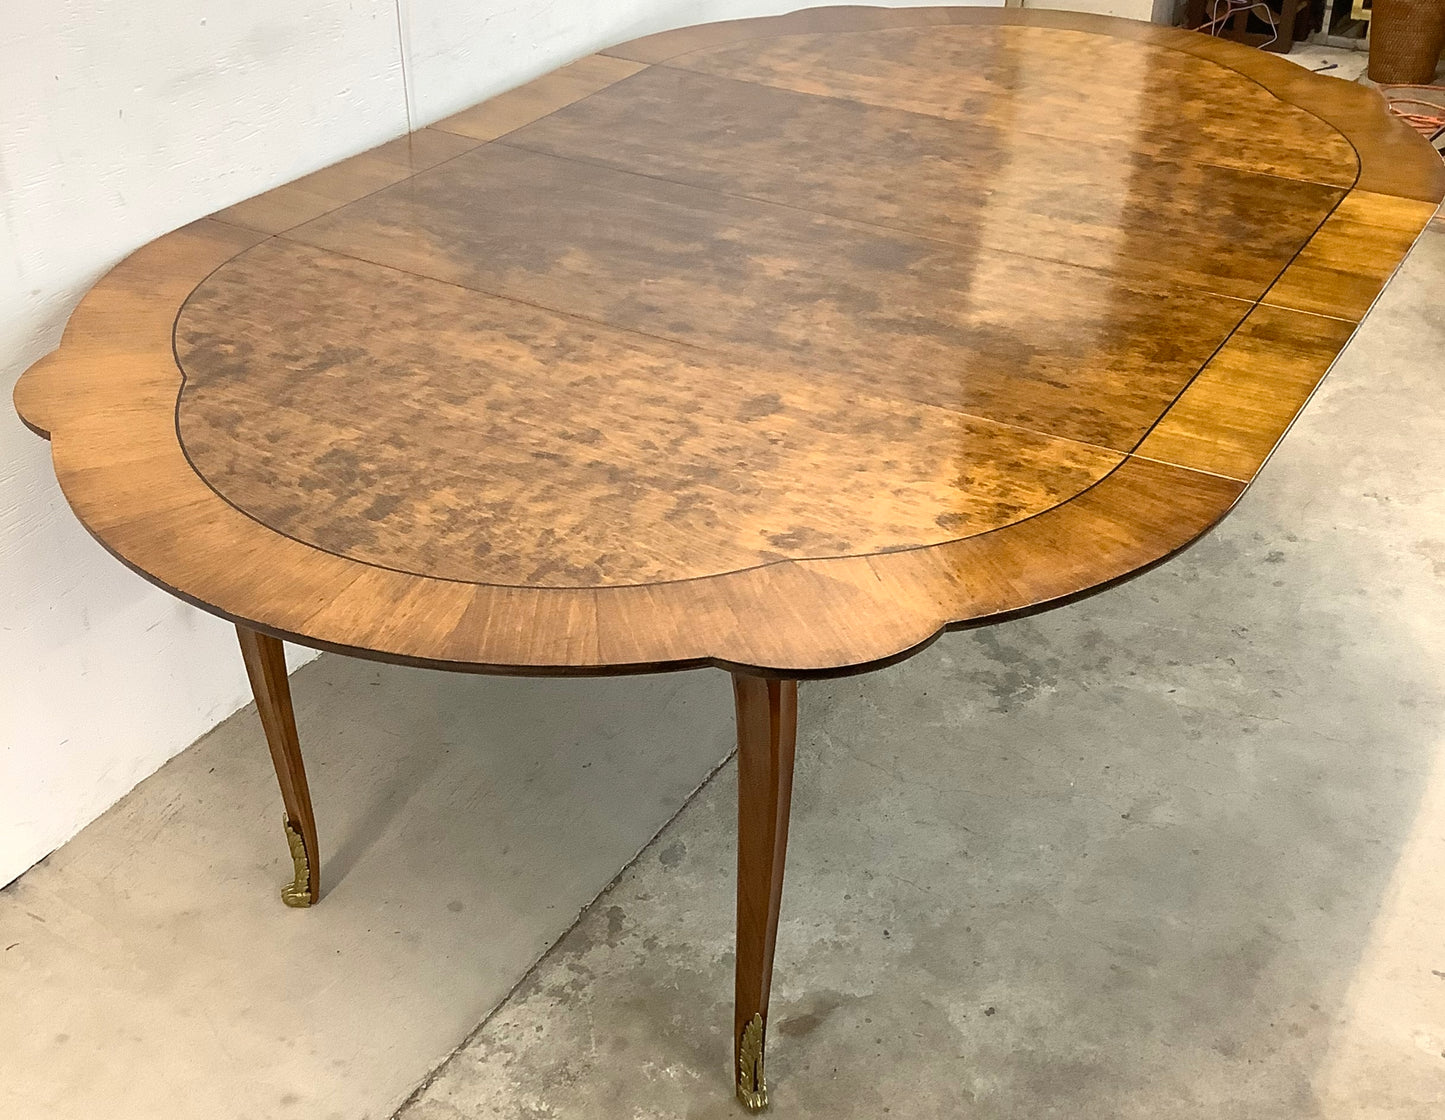 Vintage Oval Dining Room Table With Scalloped Edges and Removable Leaves